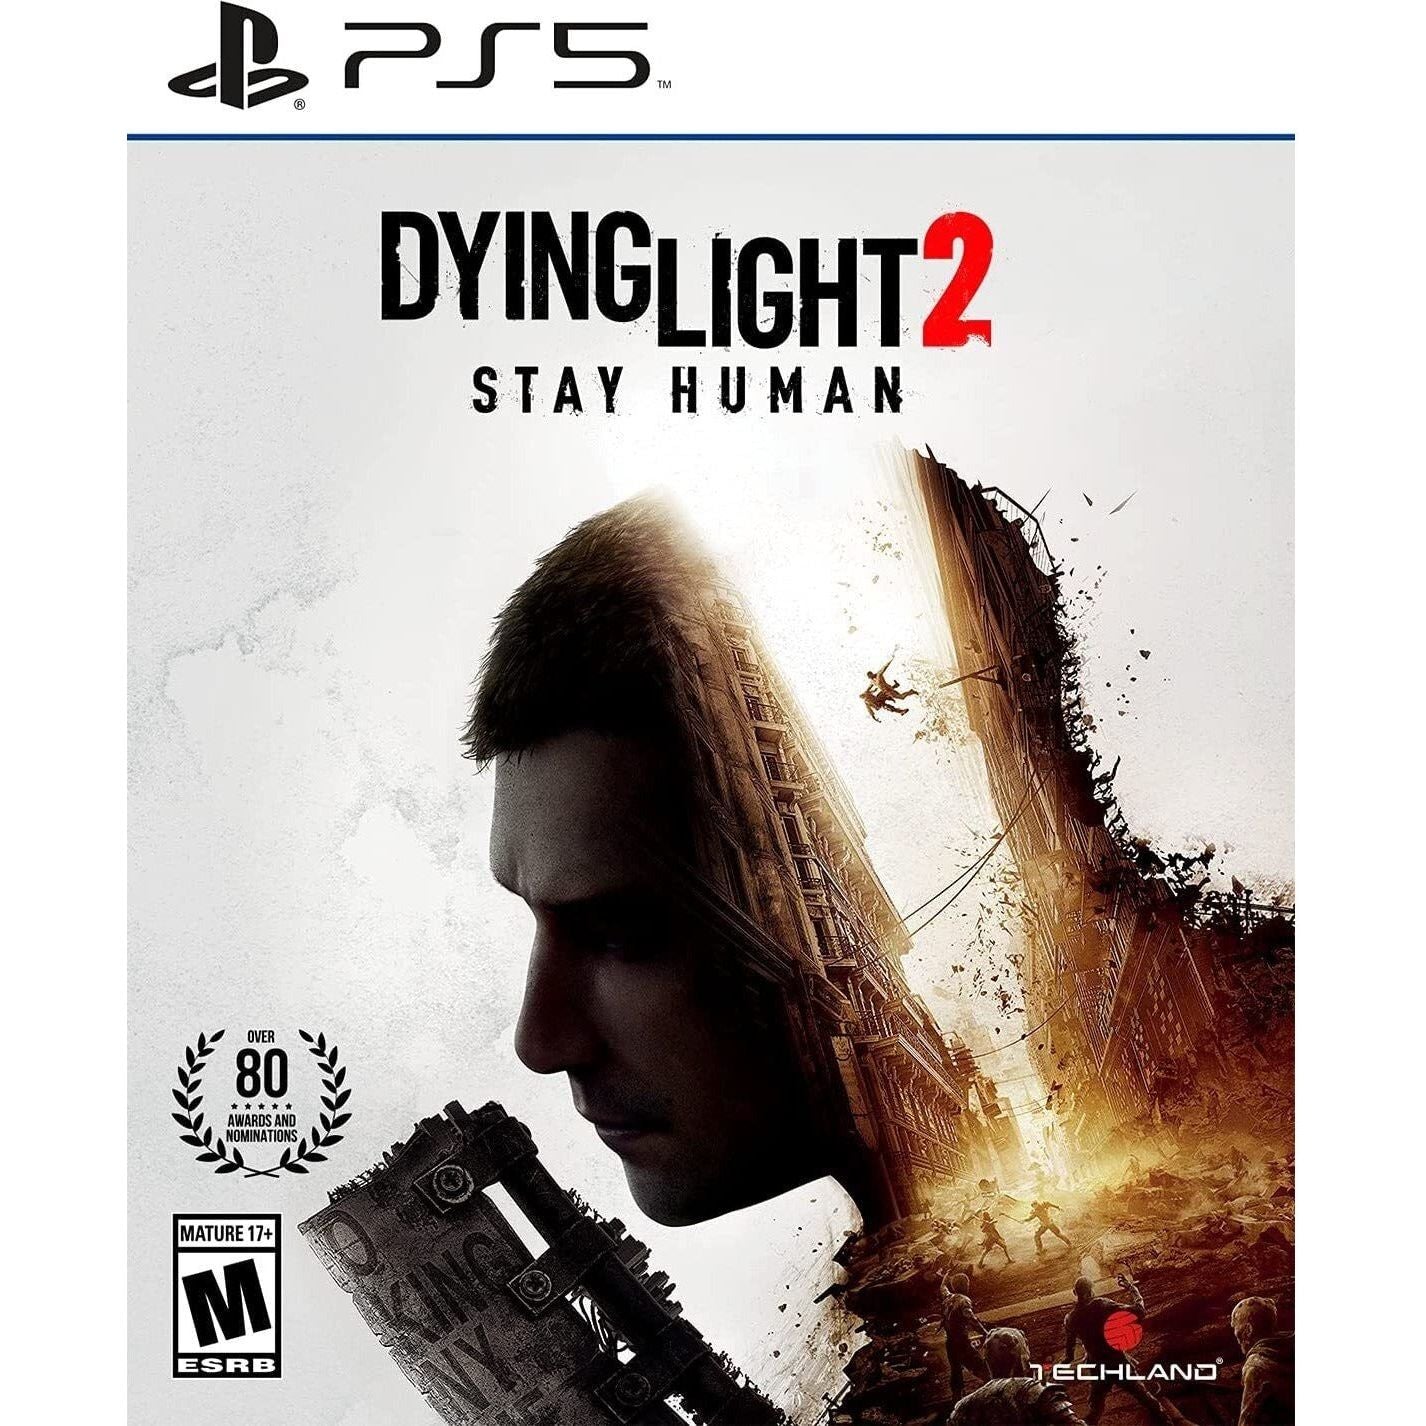 PS5 - Dying Light 2 Restez humain